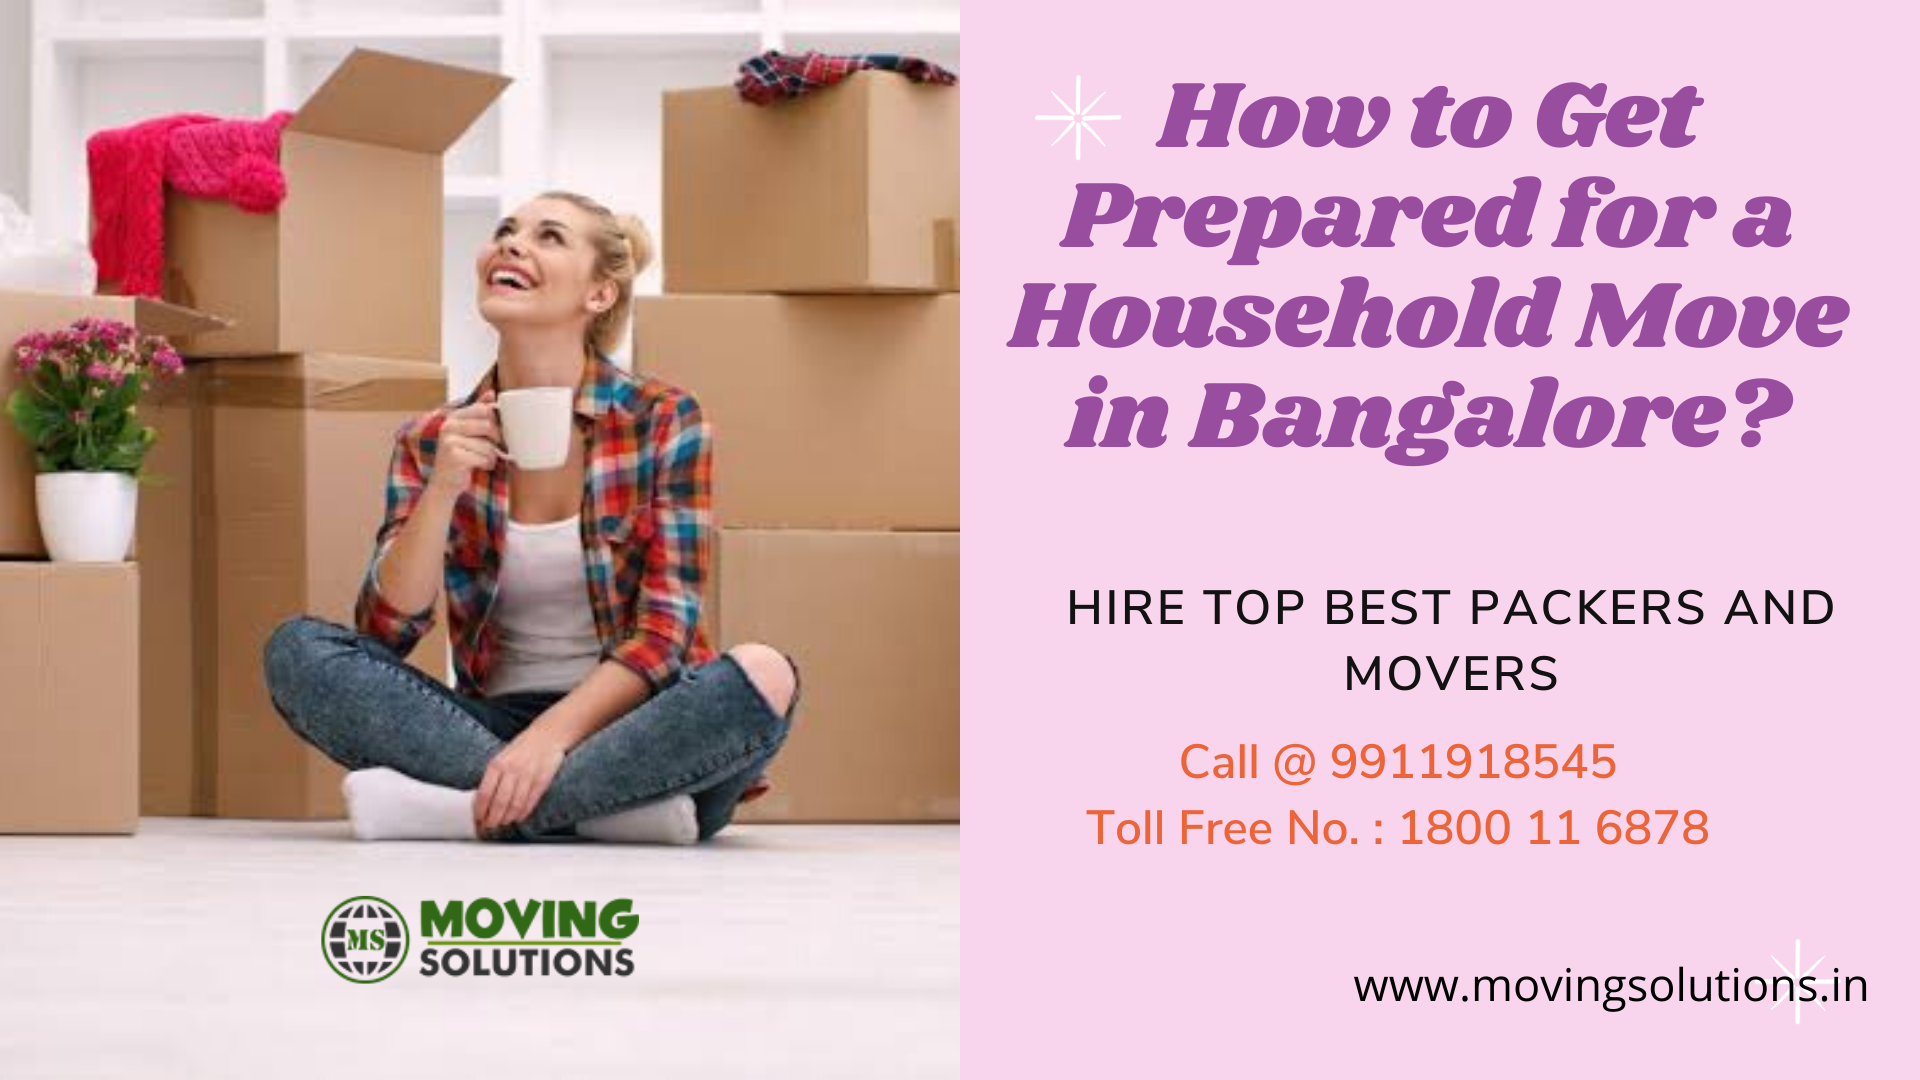 How to Get Prepared for a Household Move in Bangalore?